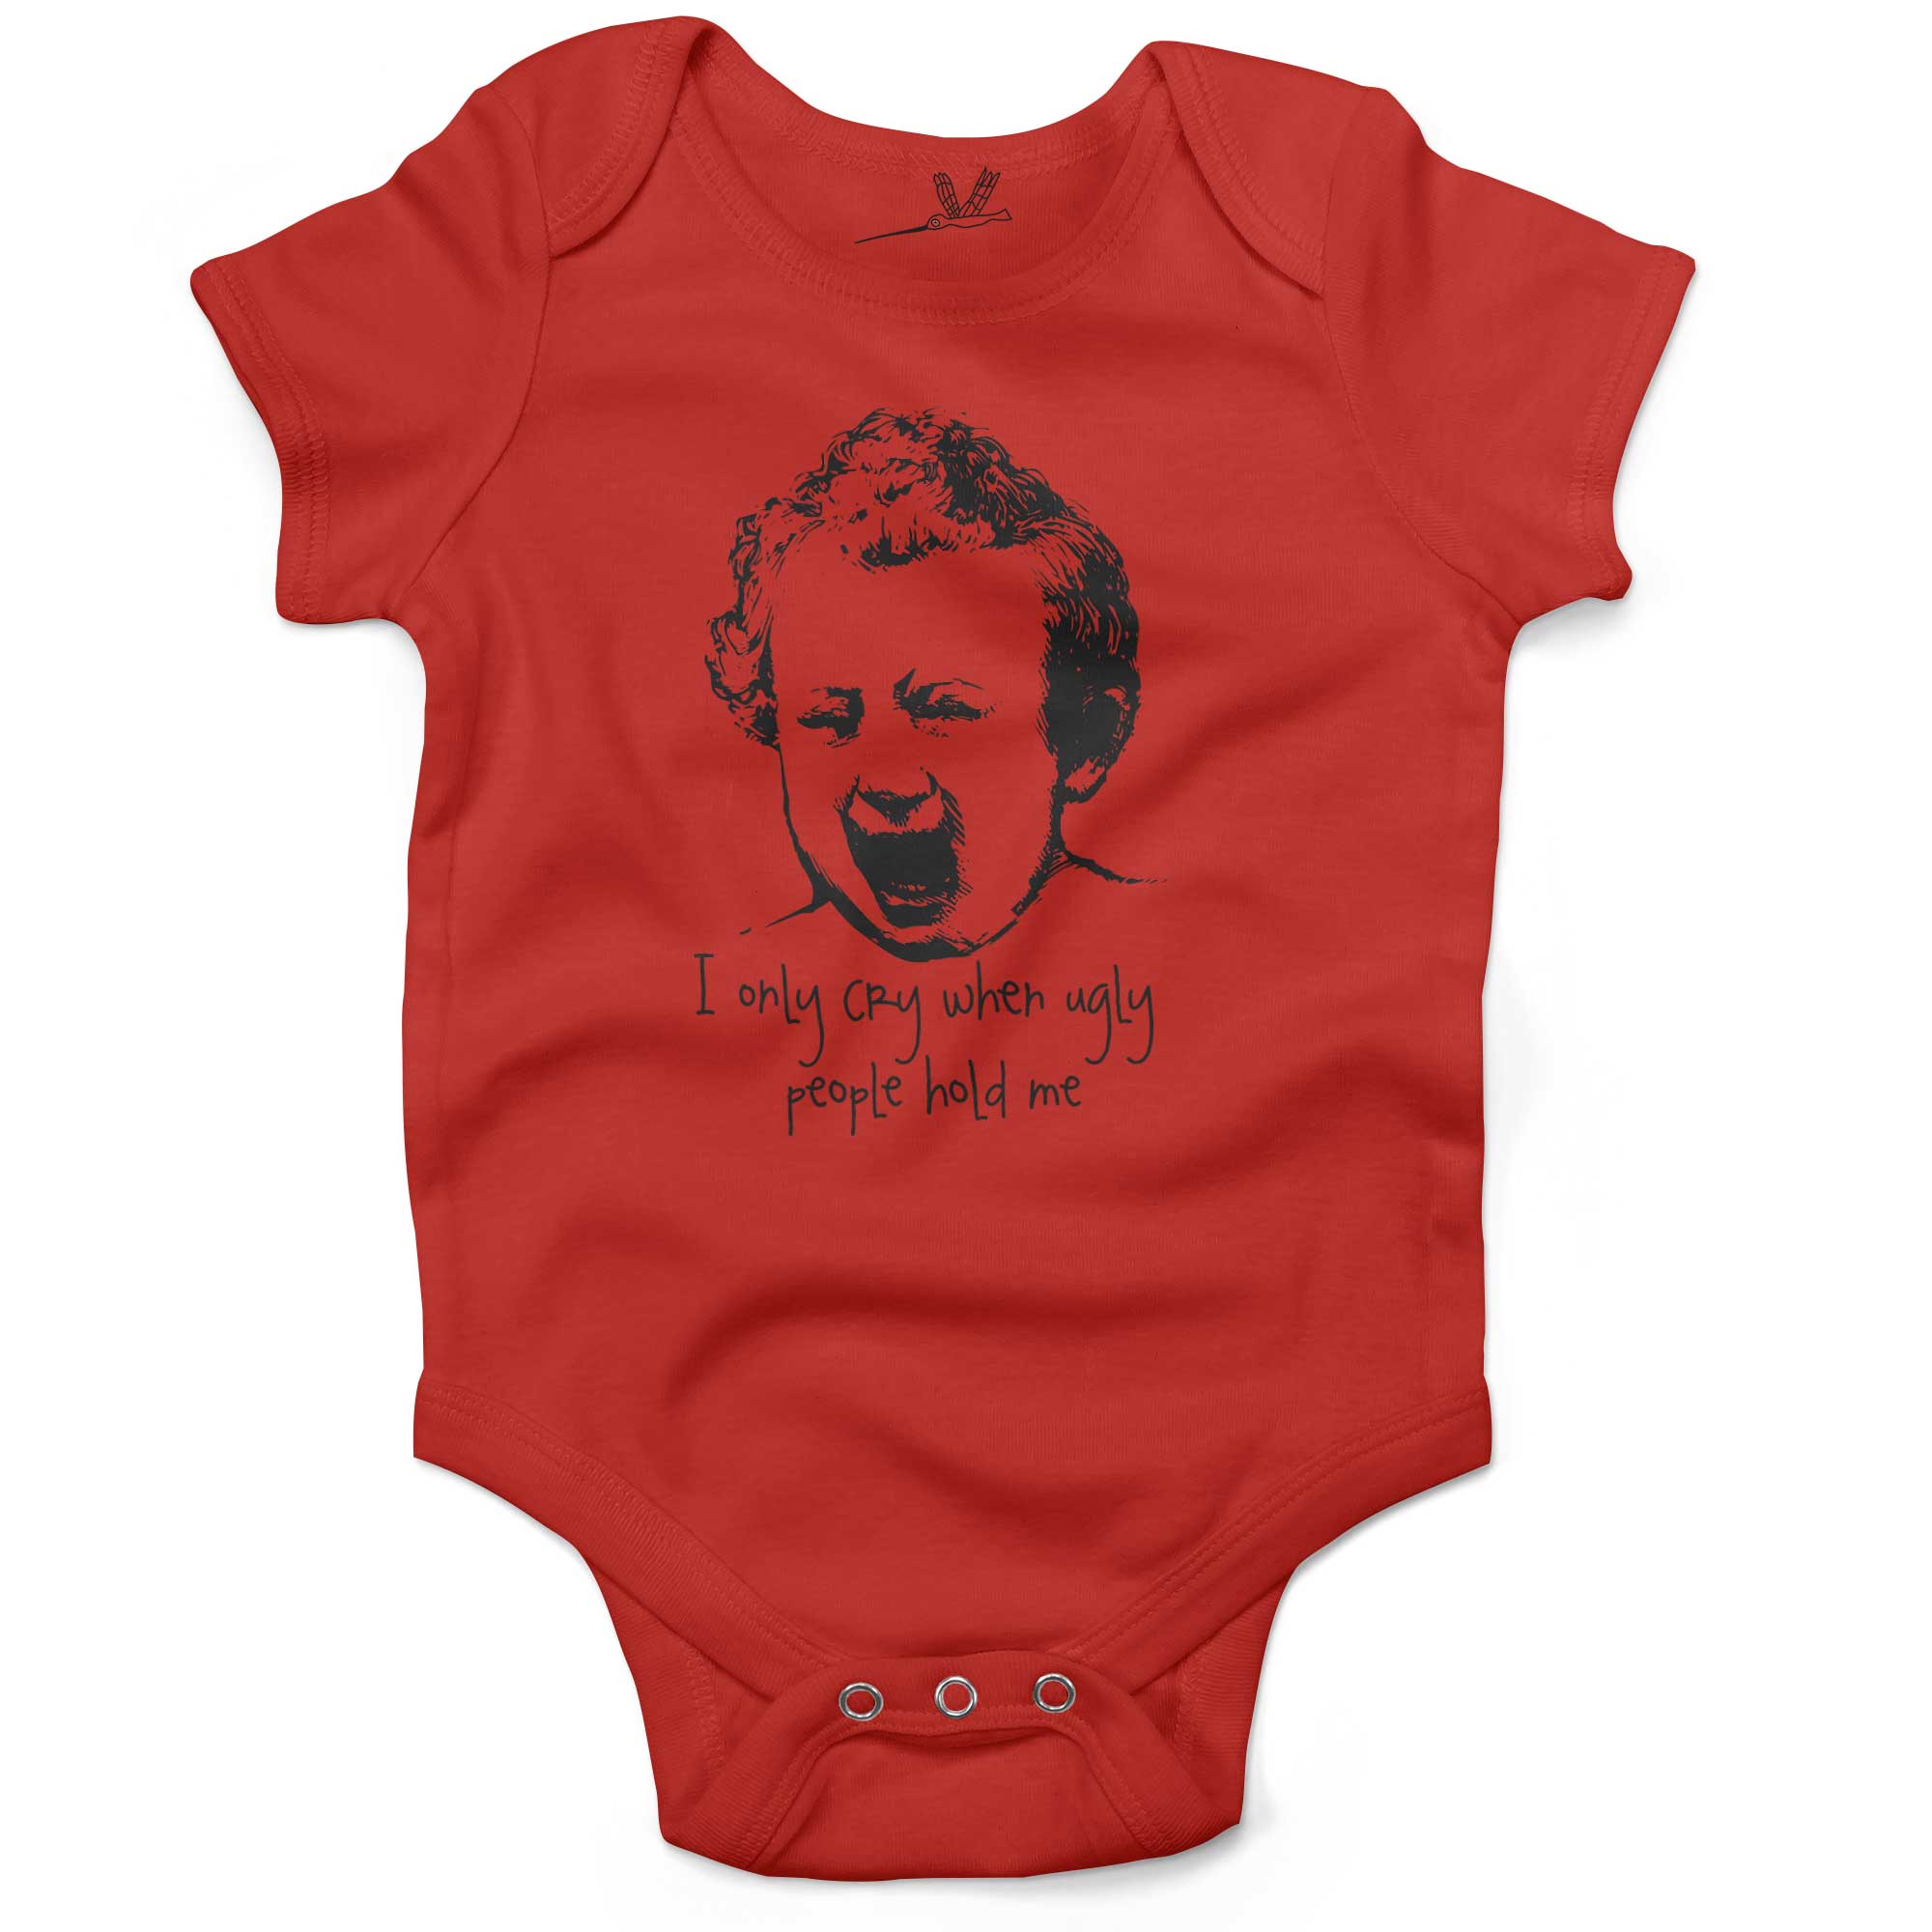 i only cry when ugly people hold me - design2 - Cute and Funny Baby  One-Piece Bodysuit, Infant, Toddler